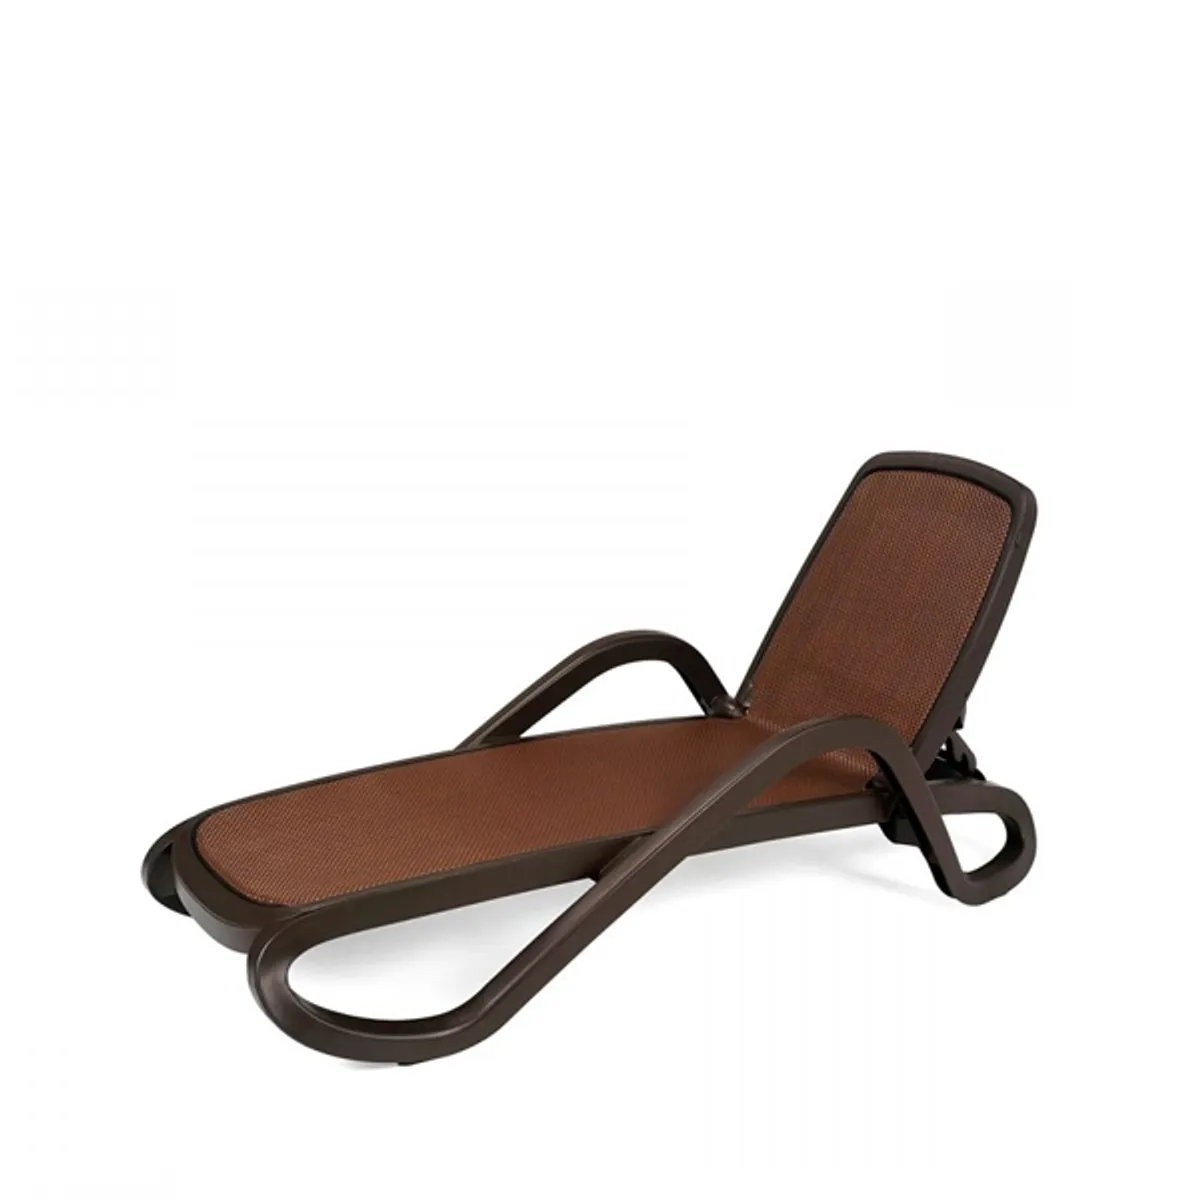 Alfa lounger with arms Inside Out Contracts6